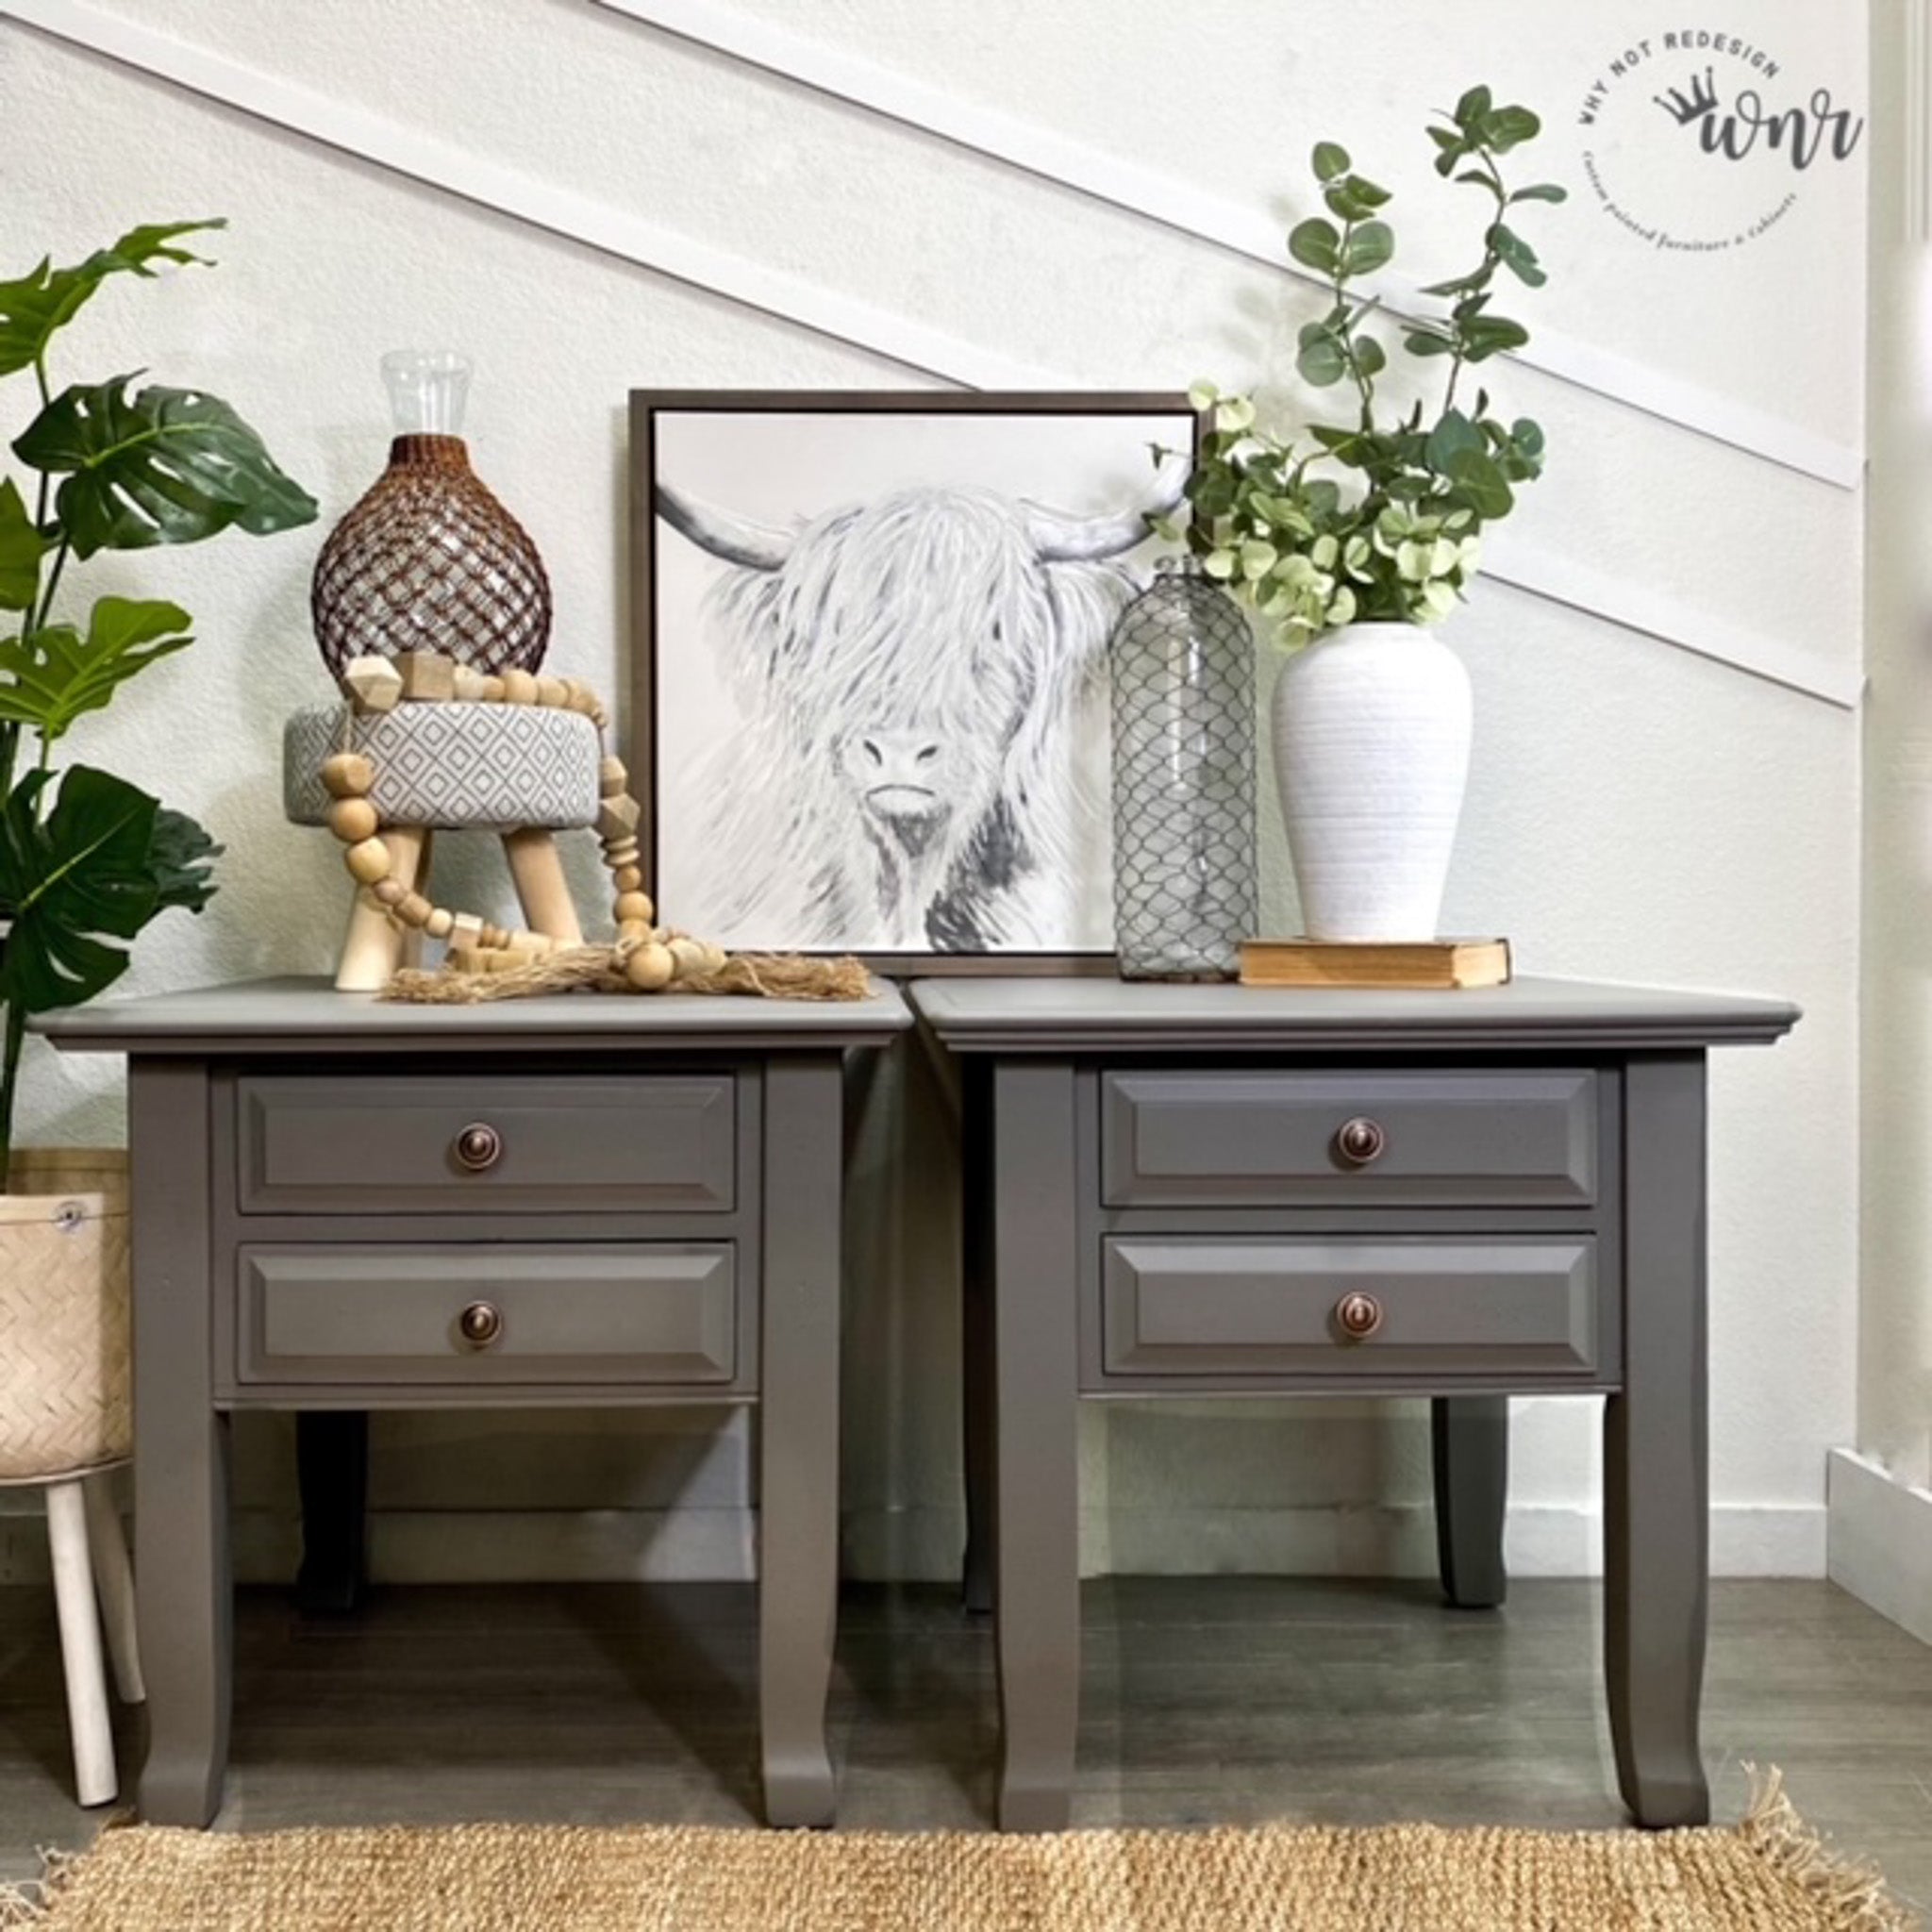 Two vintage nightstands refurbished by Why Not Redesign are painted in Dixie Belle's Hurricane Gray chalk mineral paint.